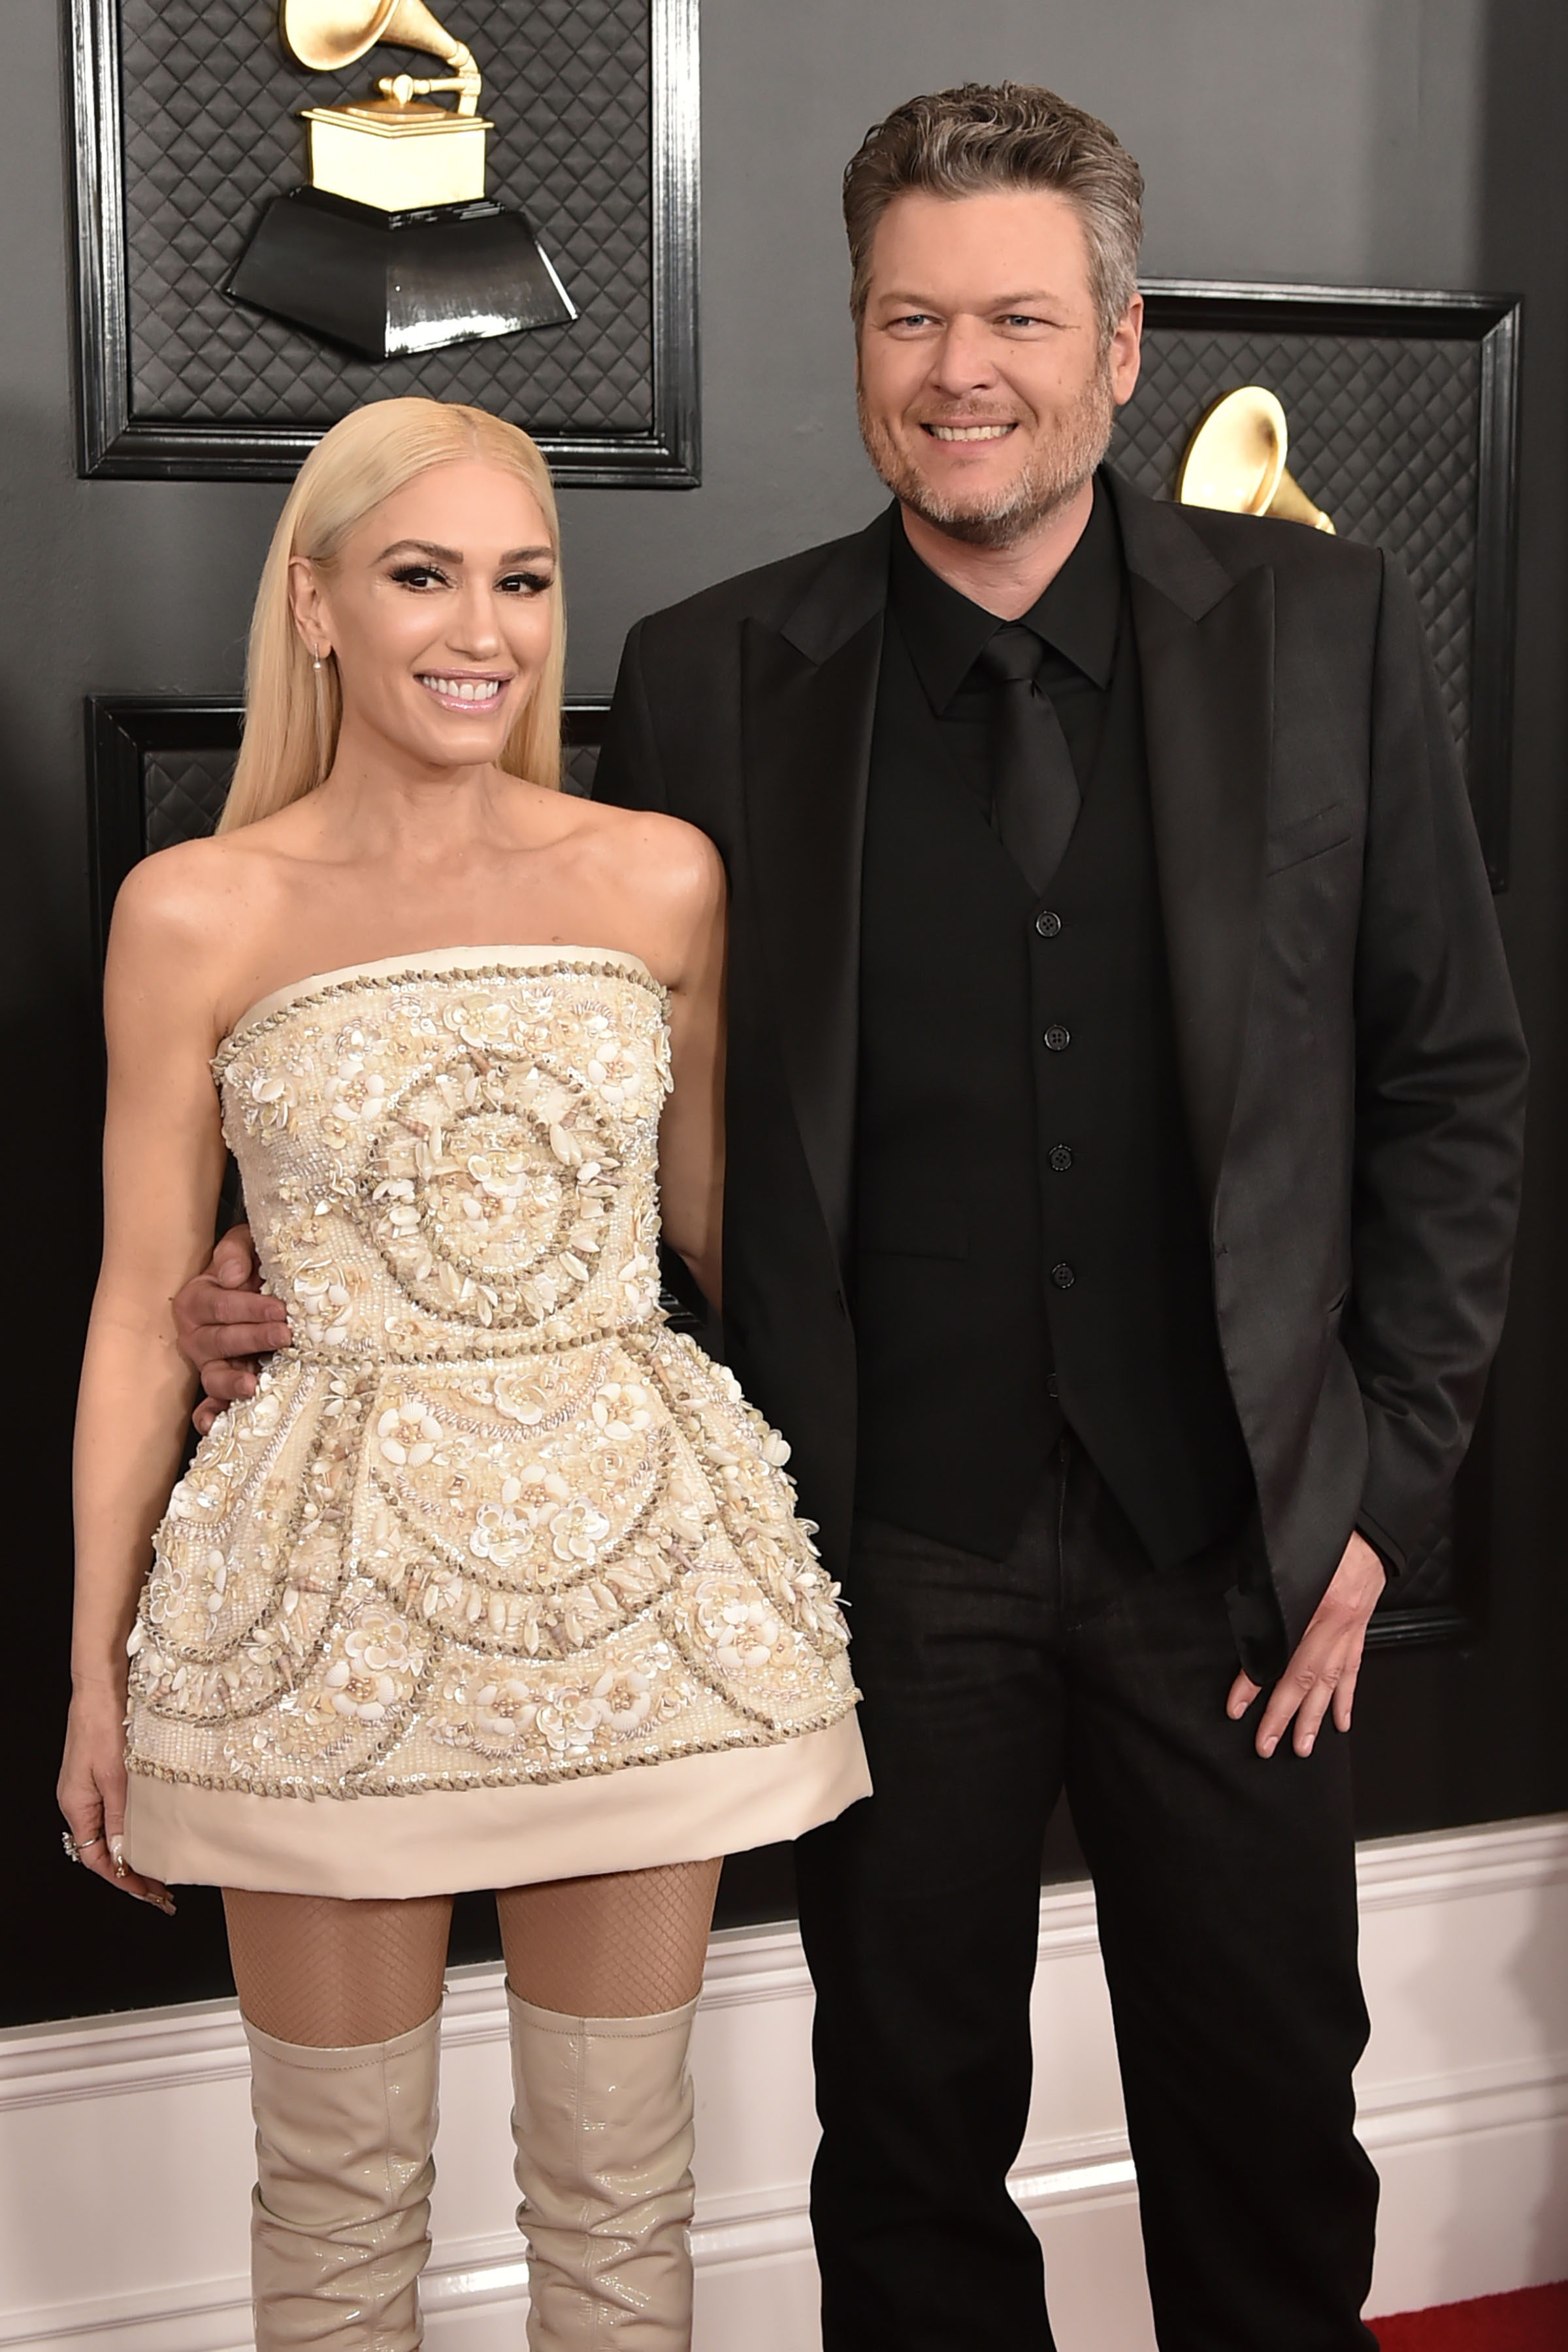 Blake and Gwen then tied the knot in 2021